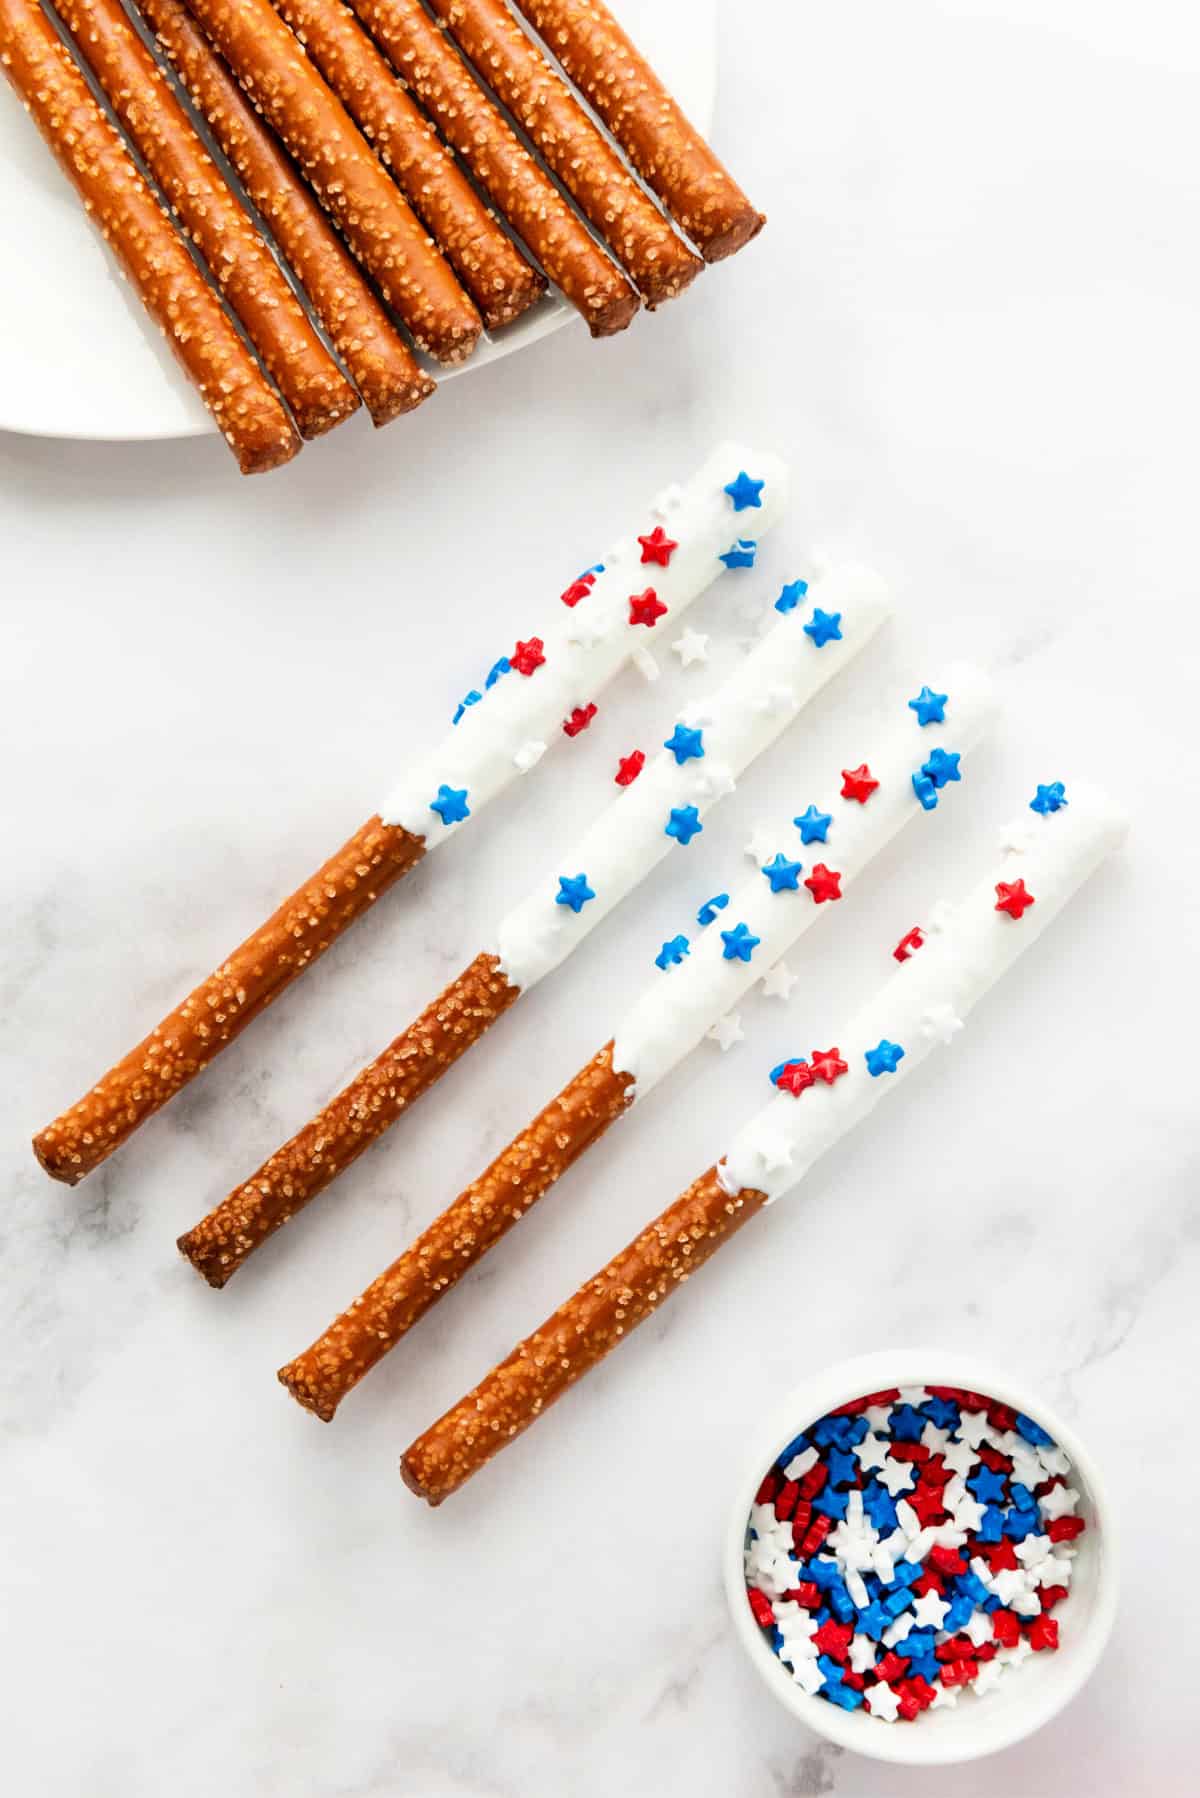 White Chocolate dipped pretzel rods with red white and blue star sprinkles